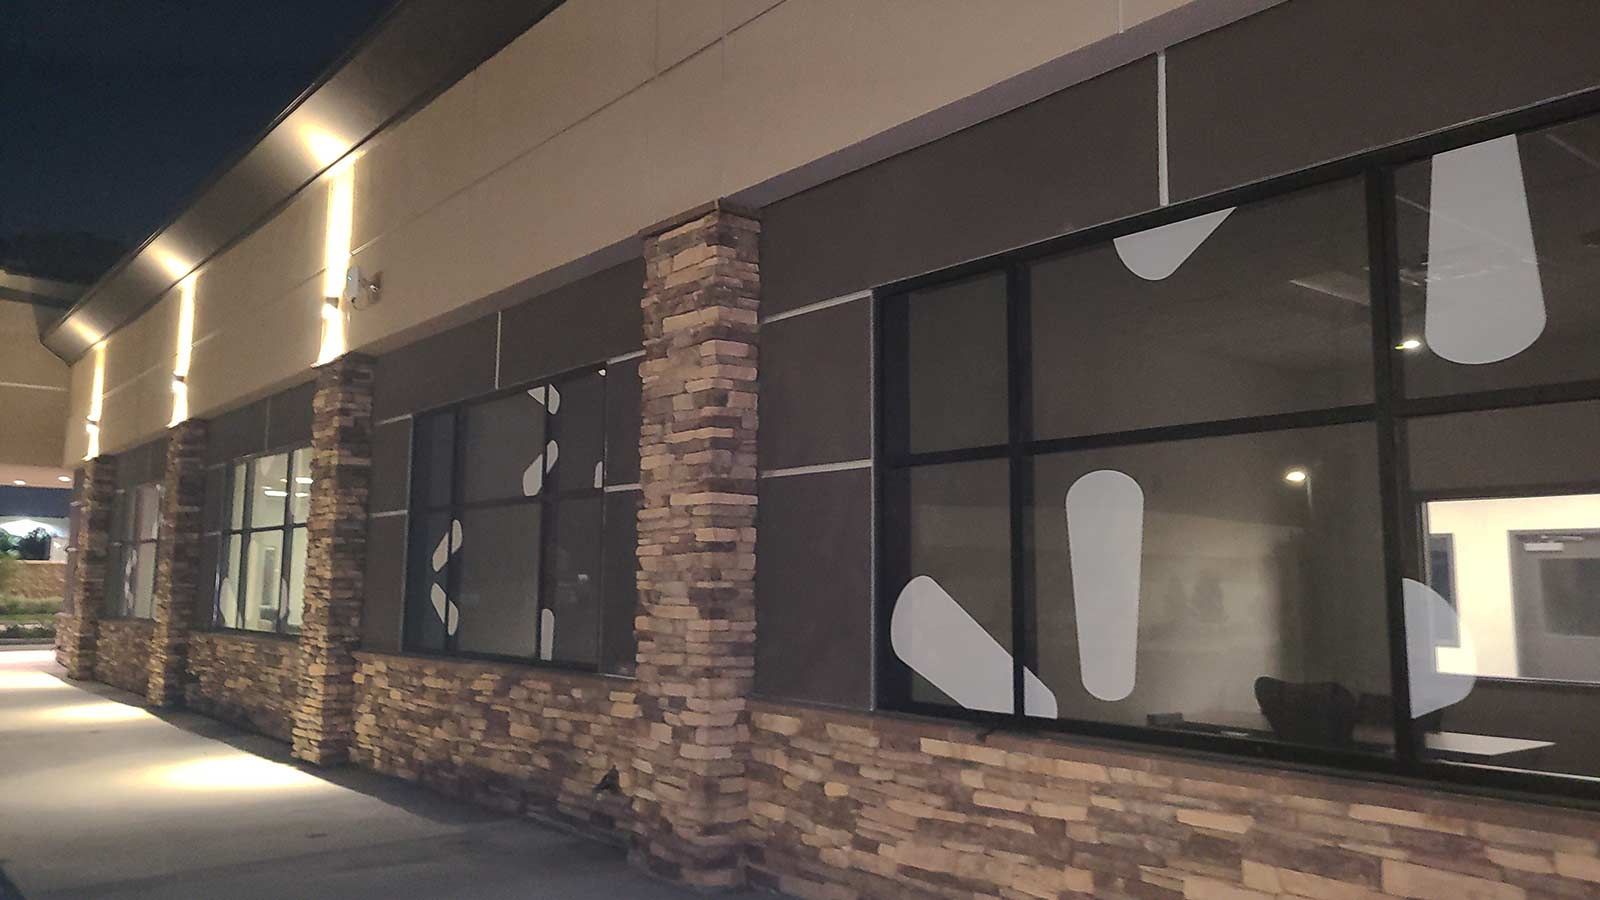 Walmart window decals applied to the exterior glass